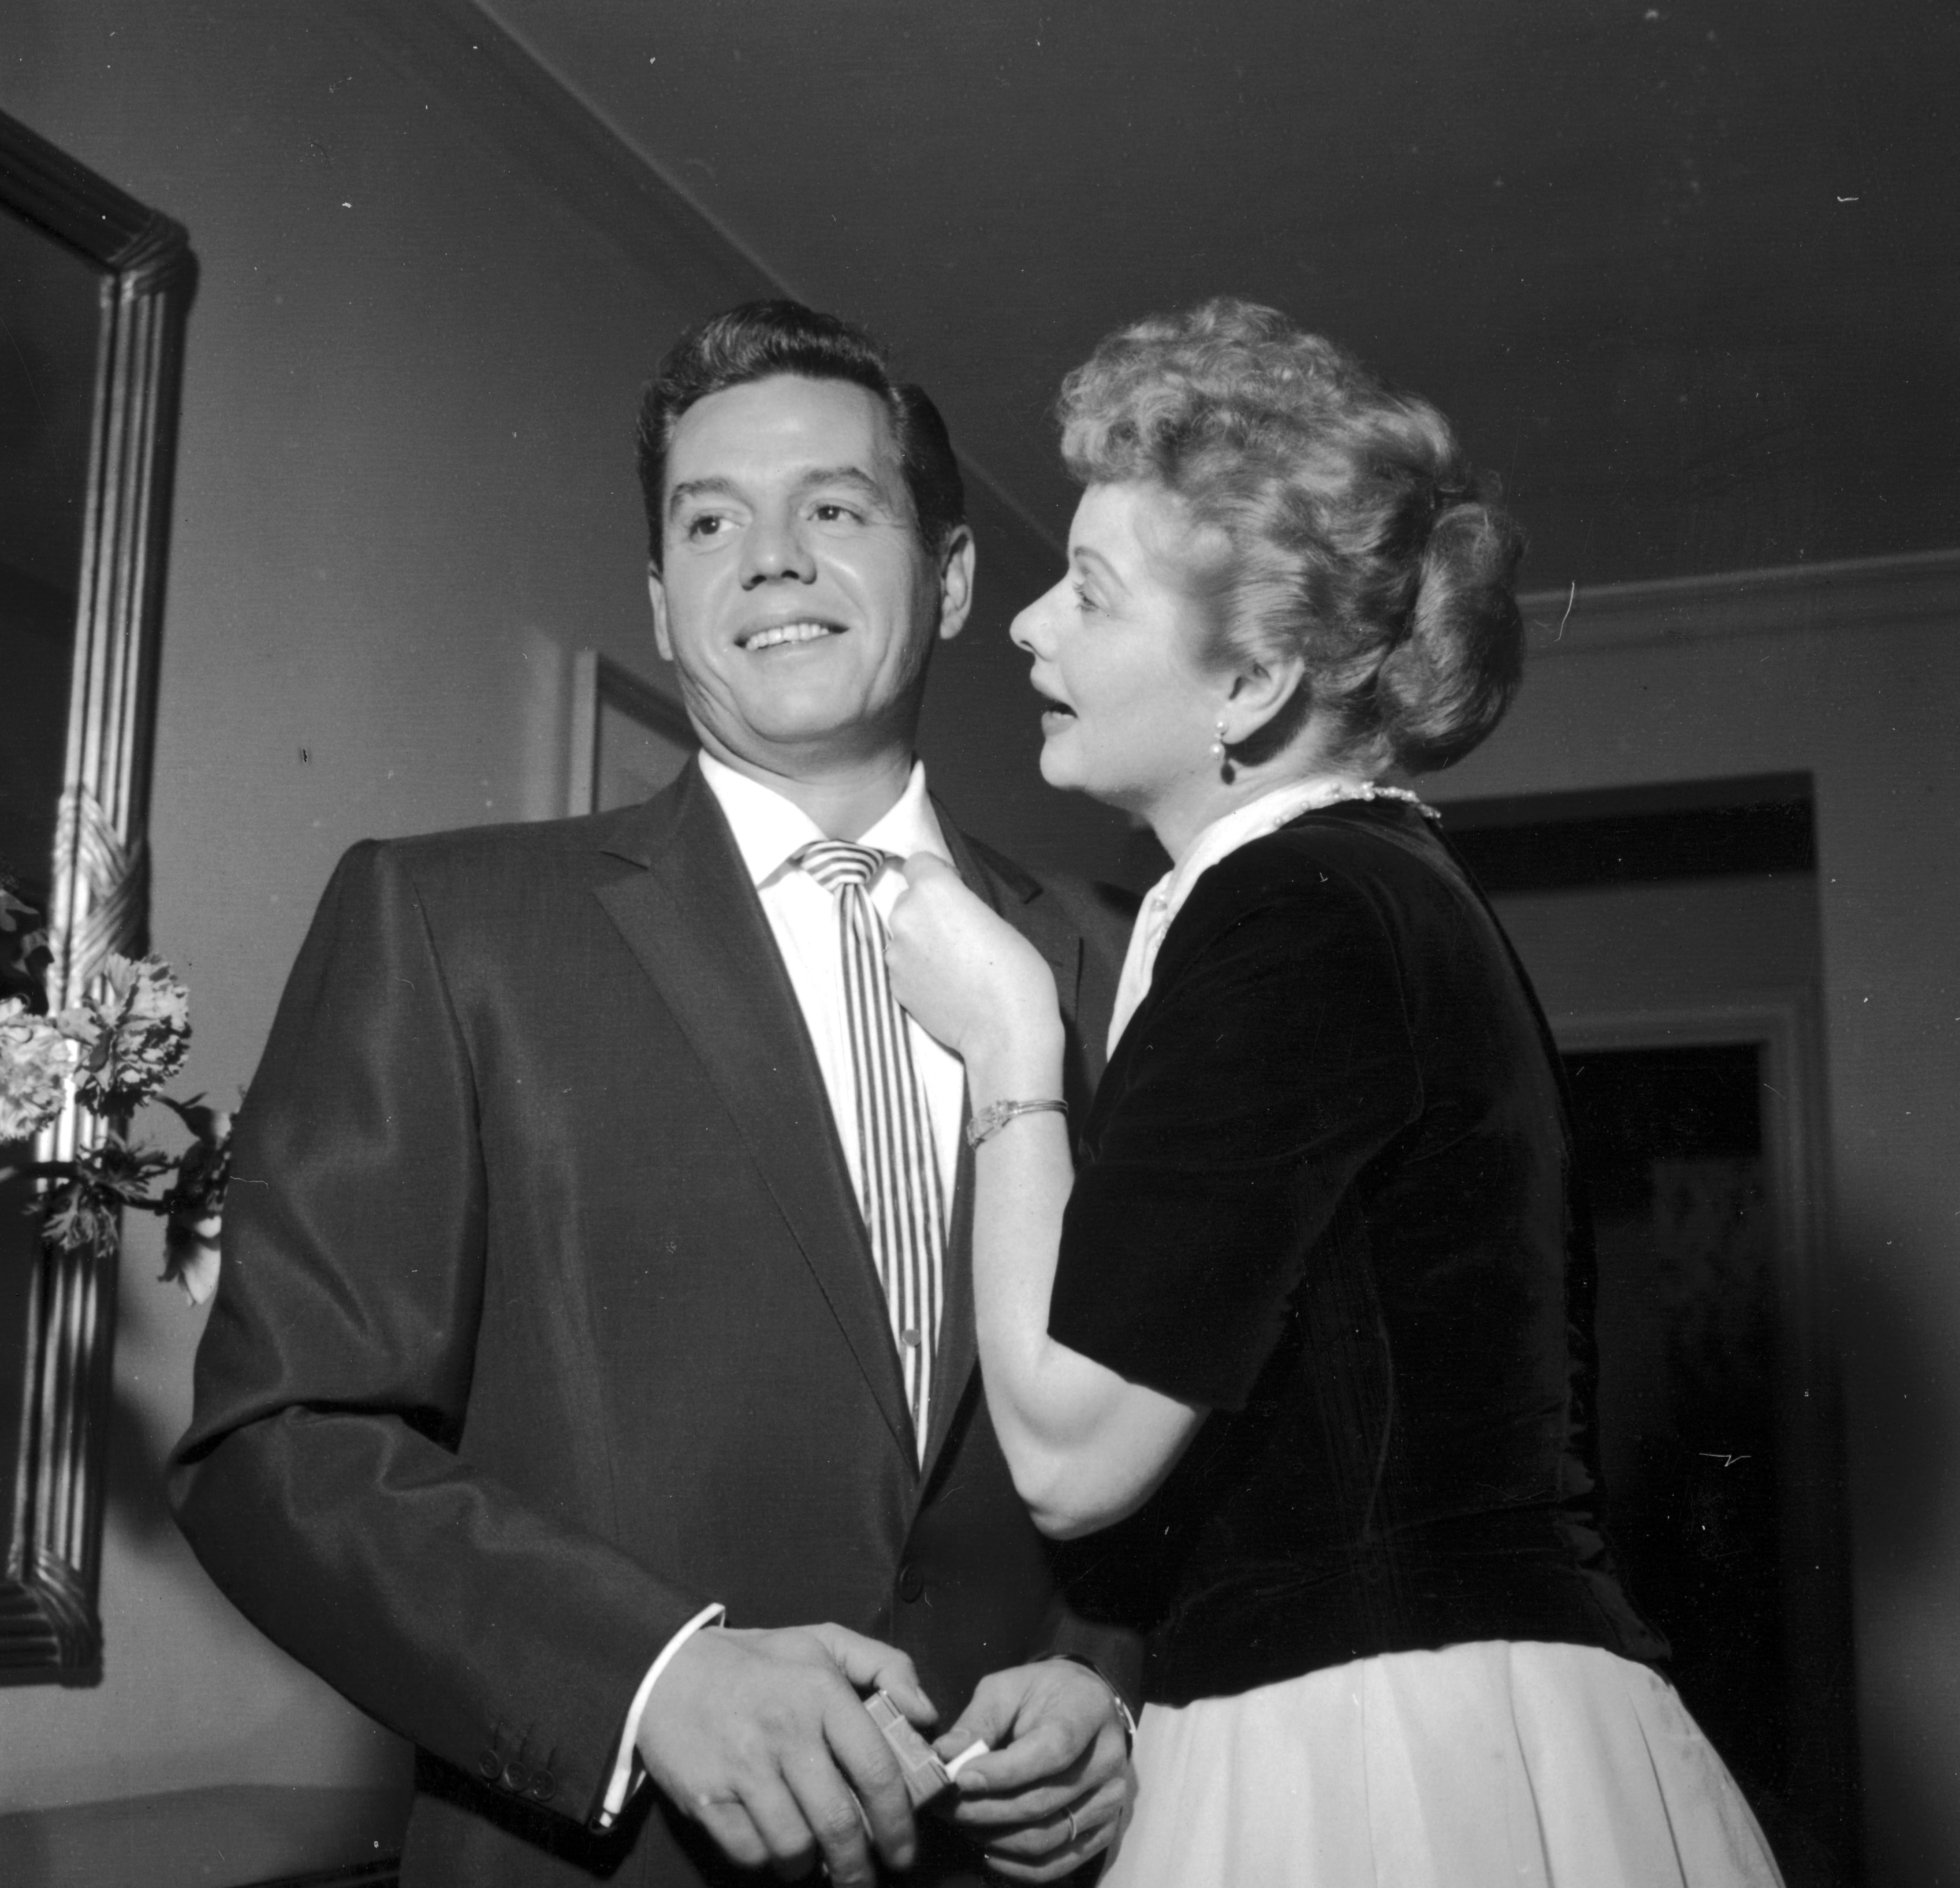 Desi Arnaz Had His Own Opinion of ‘What Went Wrong’ in His Marriage to Lucille Ball